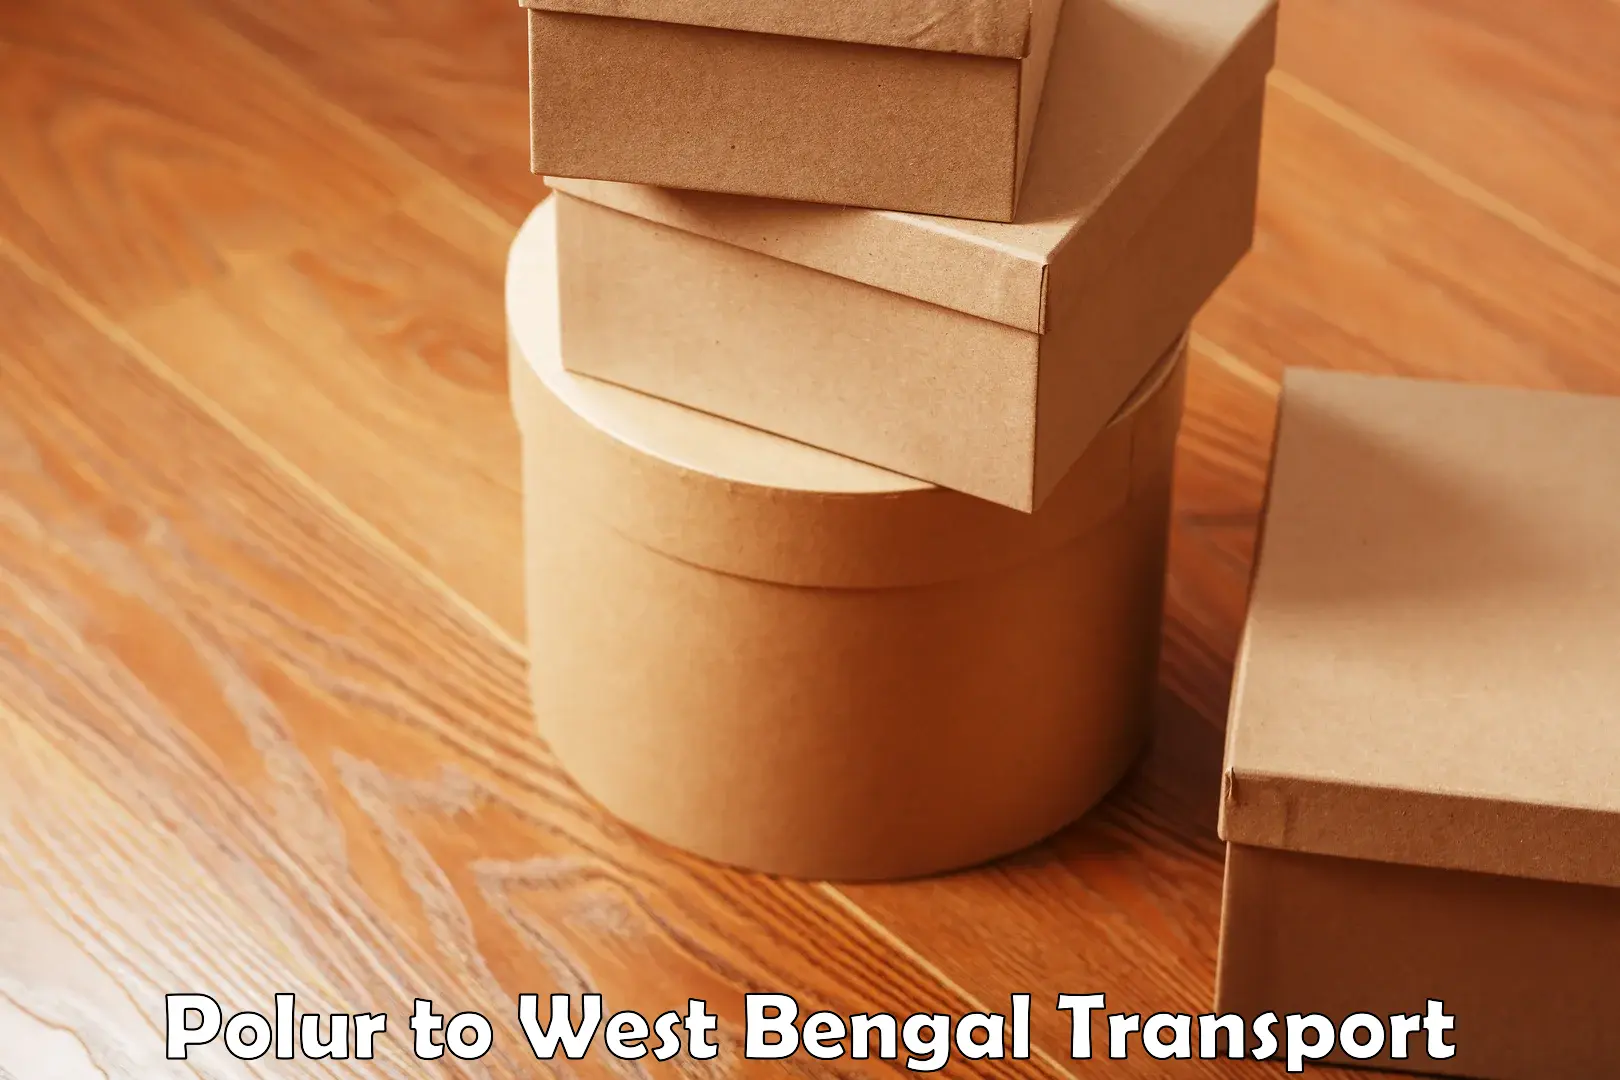 Truck transport companies in India Polur to West Bengal